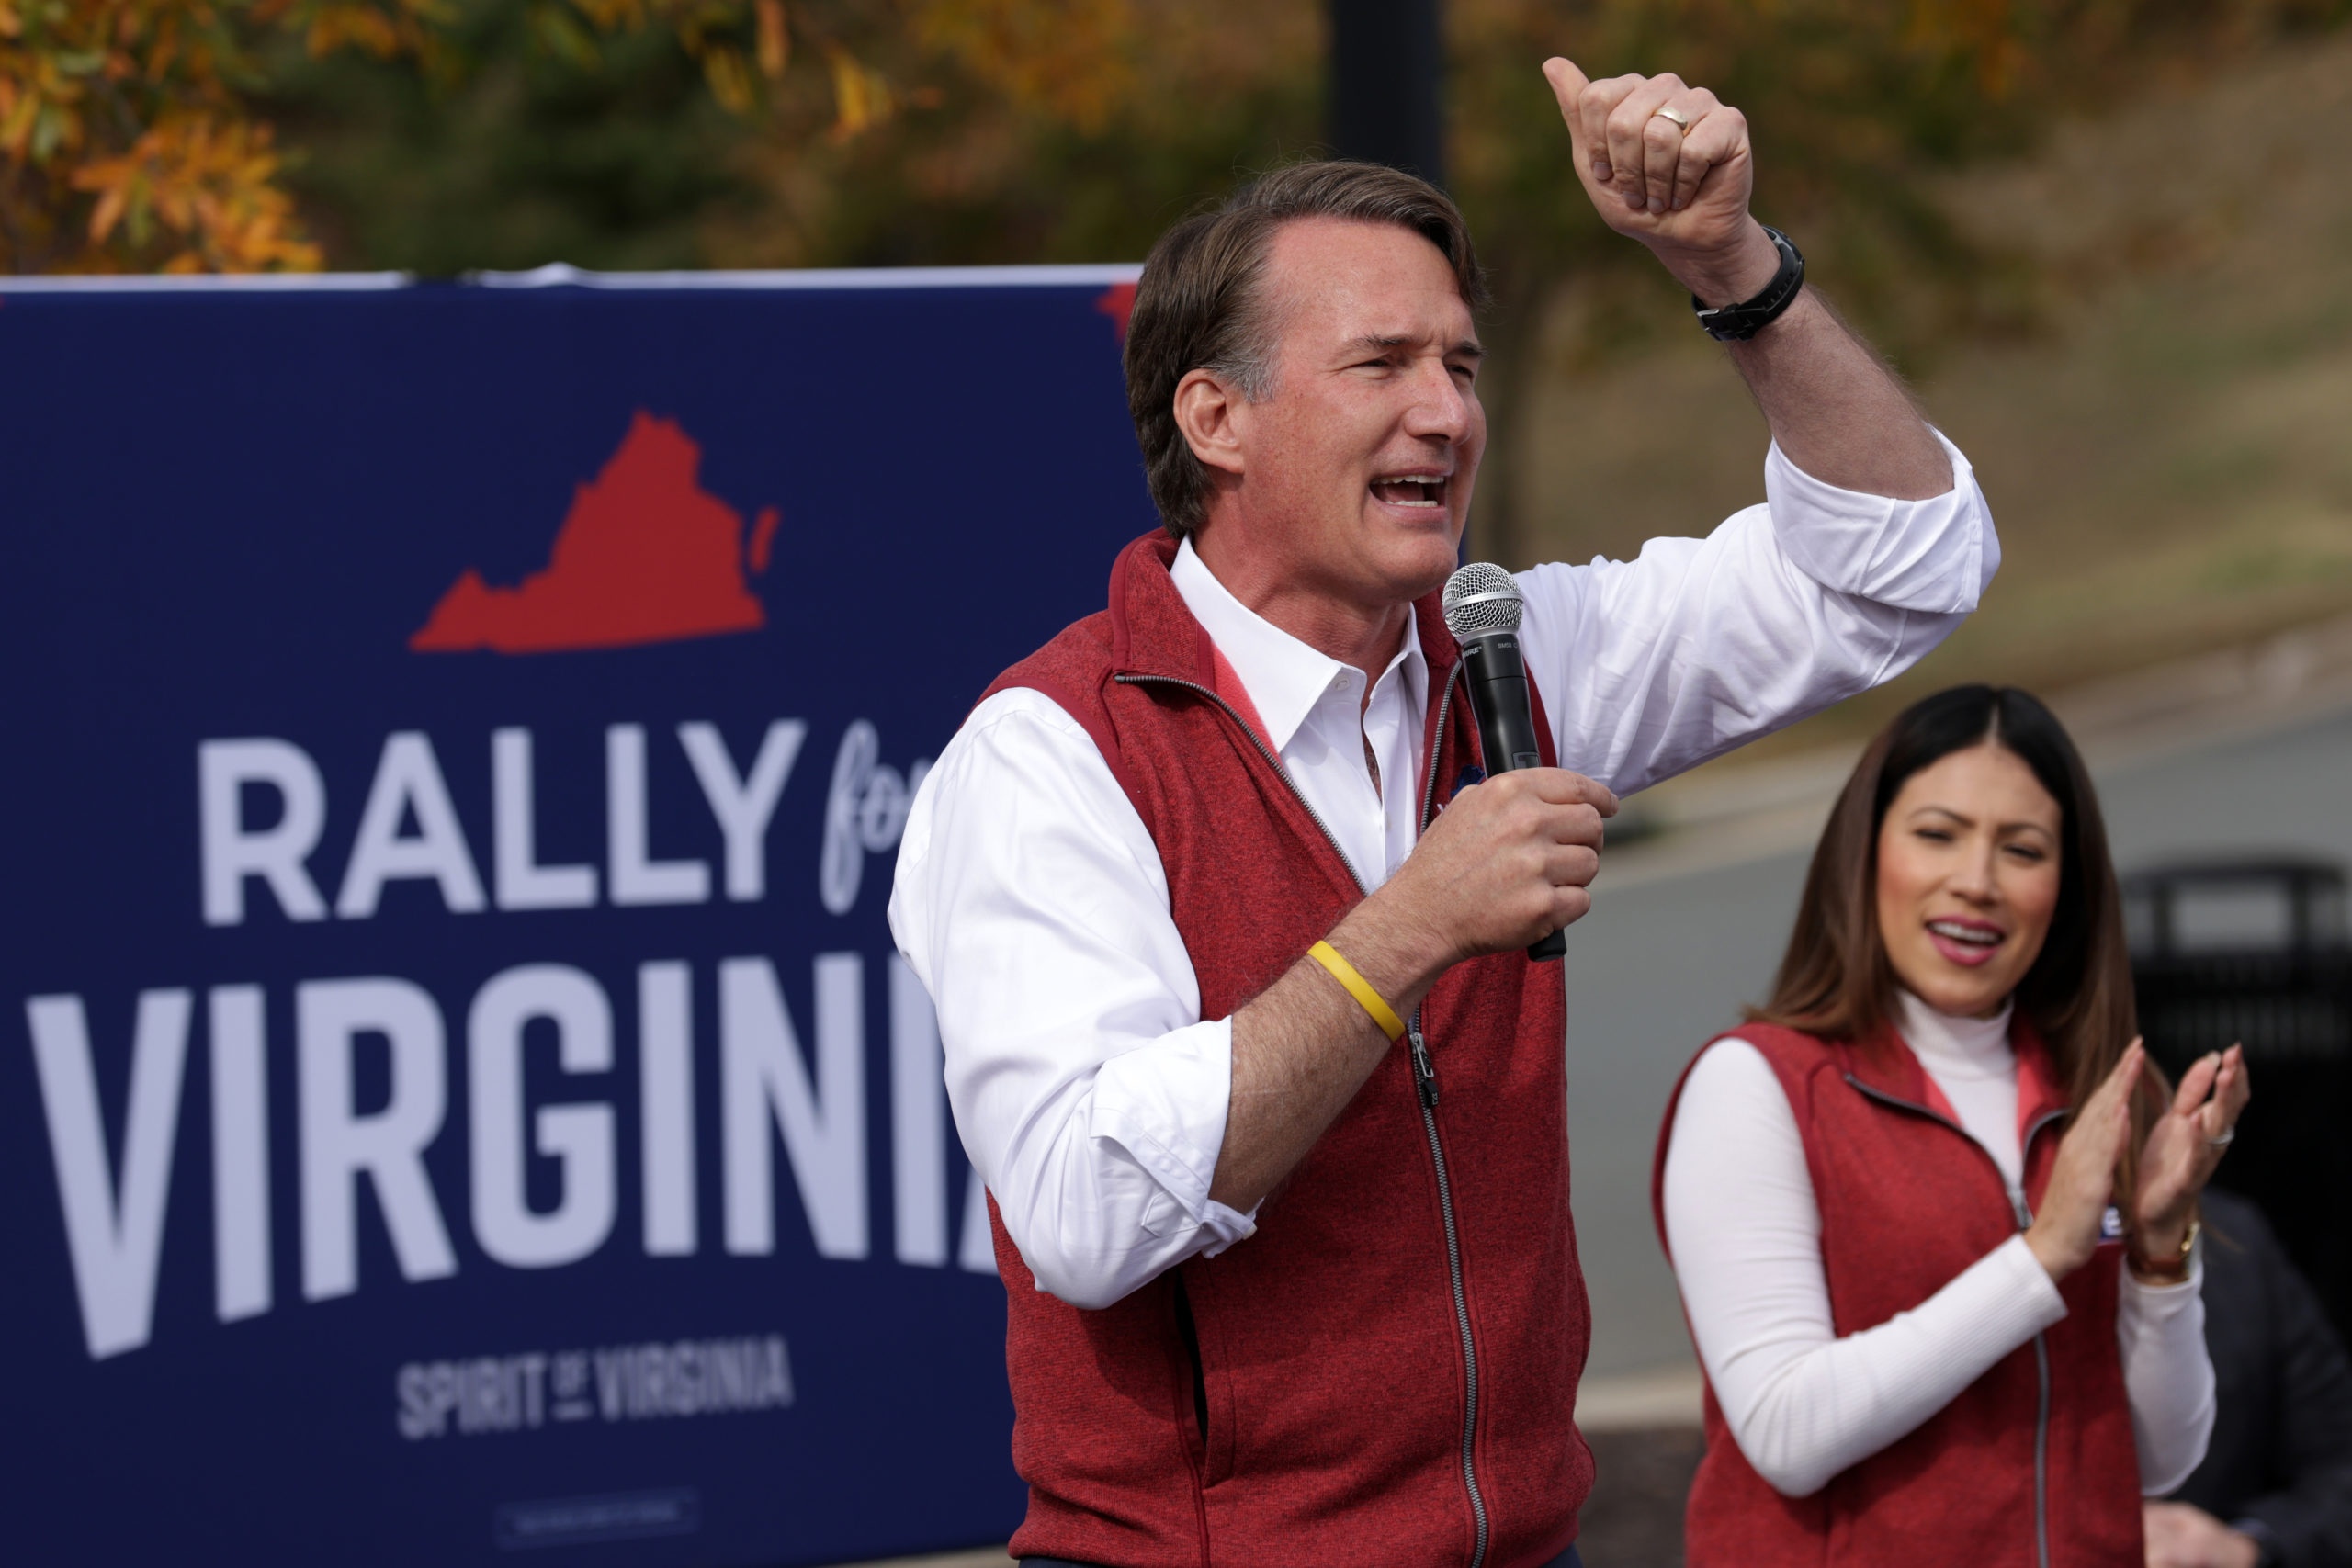 STAFFORD, VIRGINIA - OCTOBER 28: Republican U.S. House nominee Yesli Vega (R) listens to Virginia Gov. Glenn Youngkin (L) during a campaign rally on October 28, 2022 in Stafford, Virginia. Vega continued to campaign for the upcoming midterm election against incumbent U.S. Rep. Abigail Spanberger (D-VA) in Virginia’s 7th Congressional District. (Photo by Alex Wong/Getty Images)